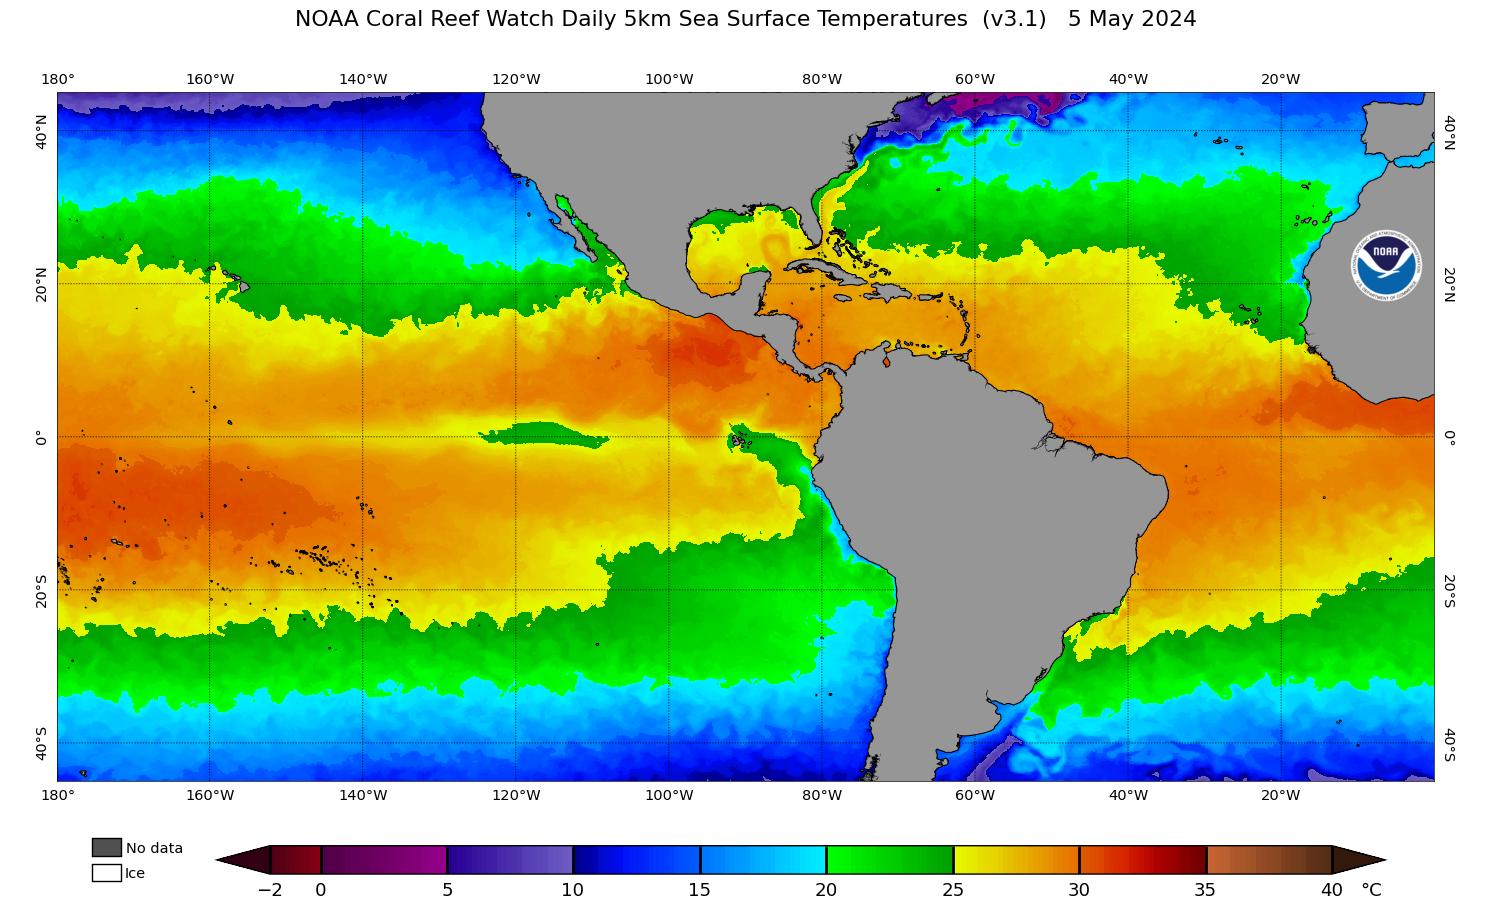 SST map - Sea Surface Temperature. Zone: West